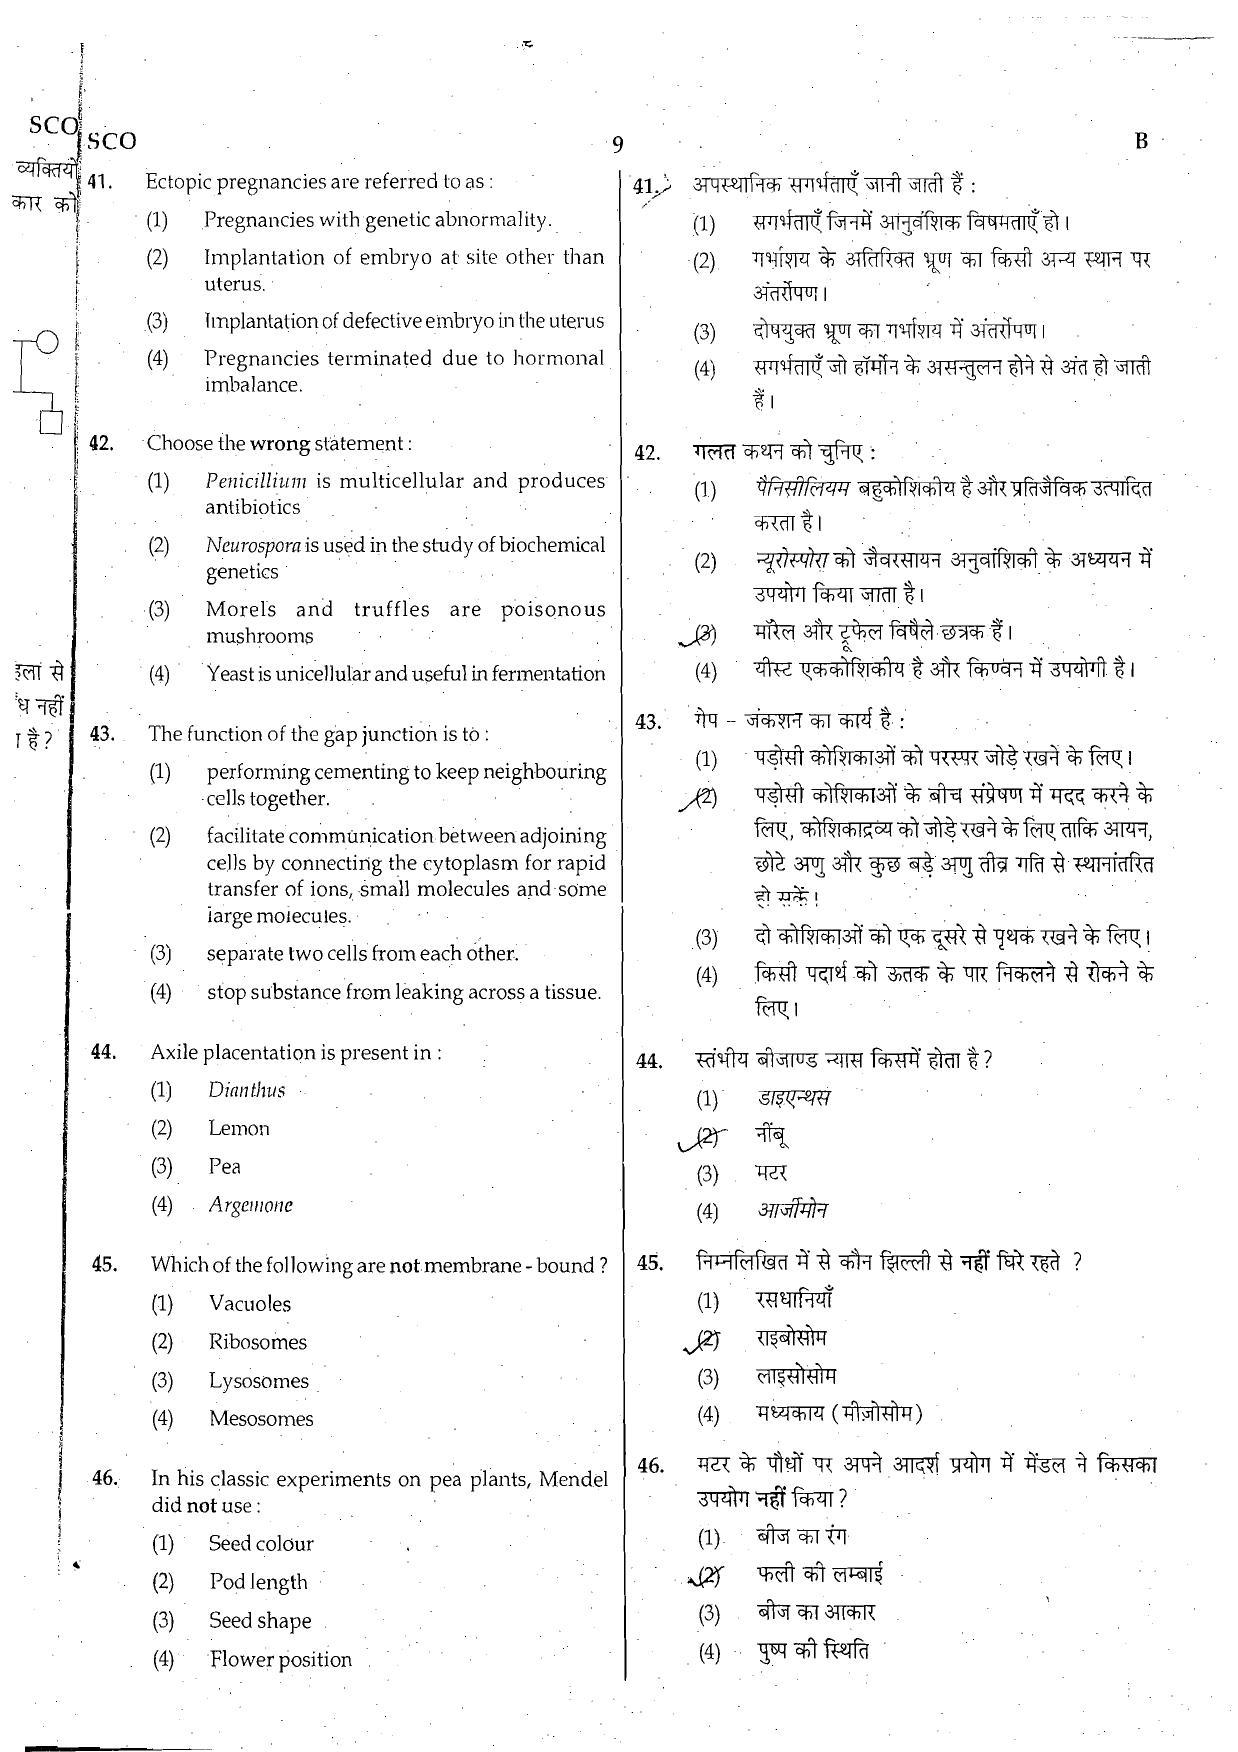 NEET Code B 2015 Question Paper - Page 9